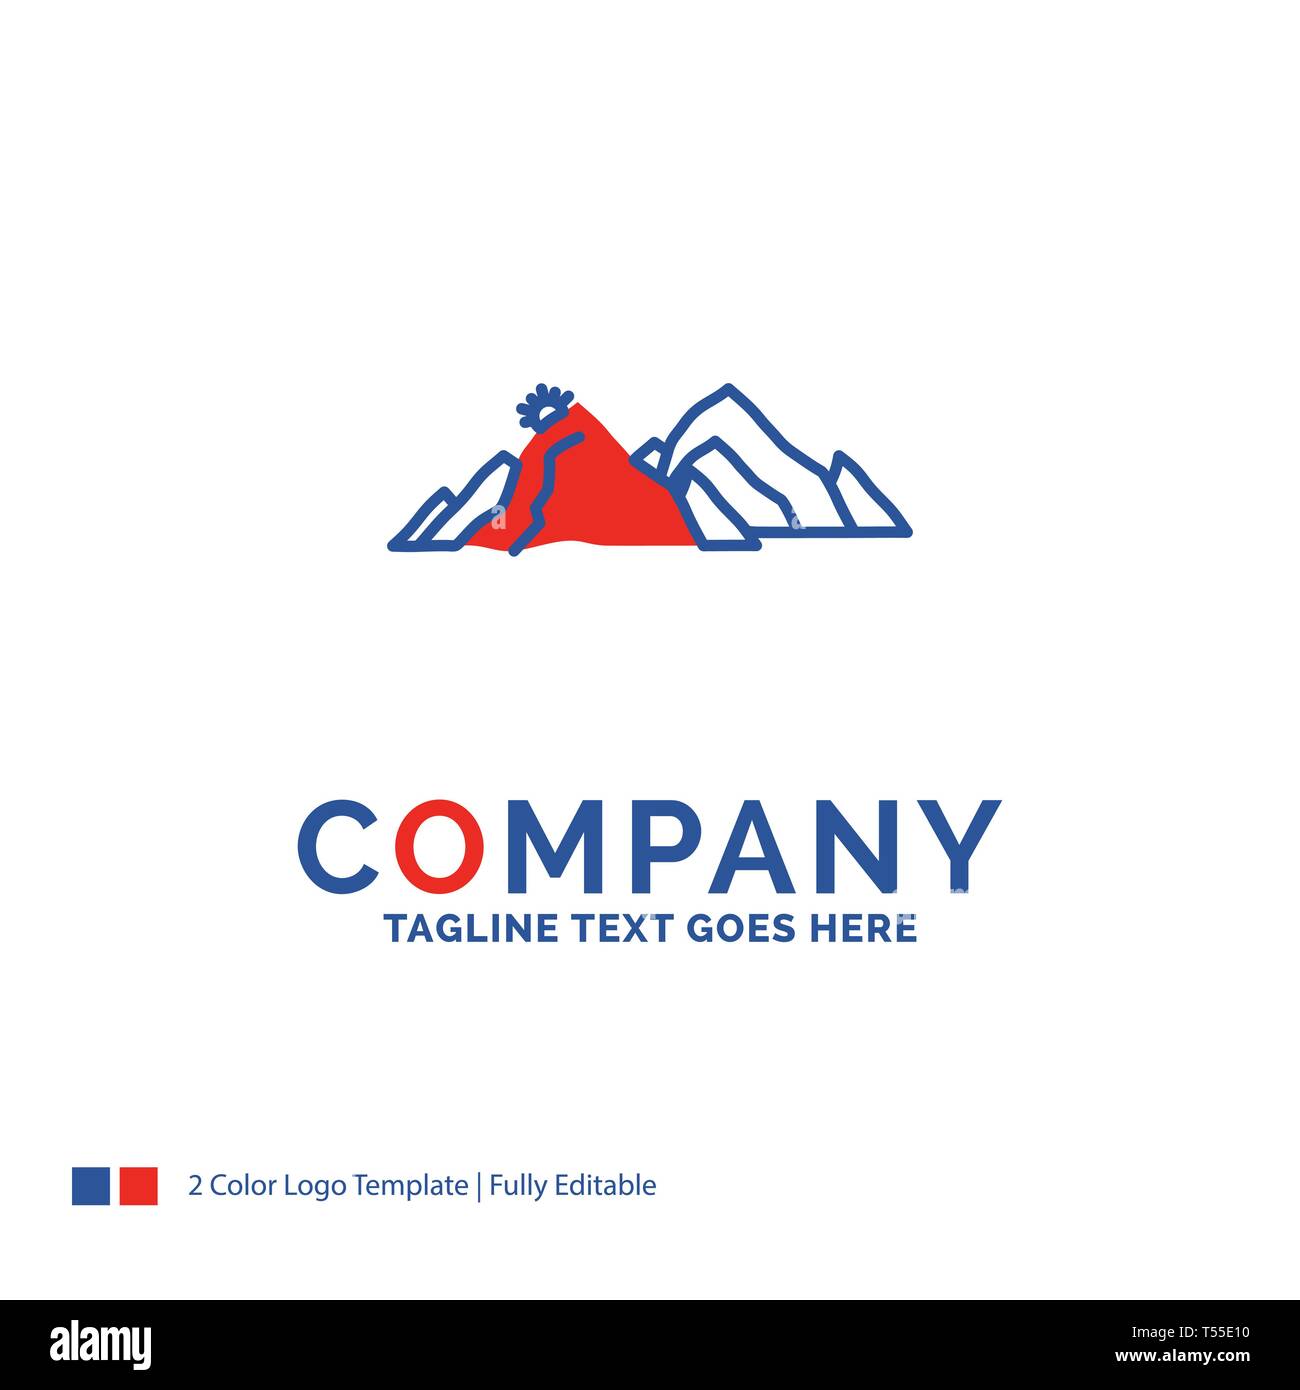 Company Name Logo Design For Mountain Landscape Hill Nature Scene Blue And Red Brand Name Design With Place For Tagline Abstract Creative Logo T Stock Vector Image Art Alamy,Industrial House Design Exterior